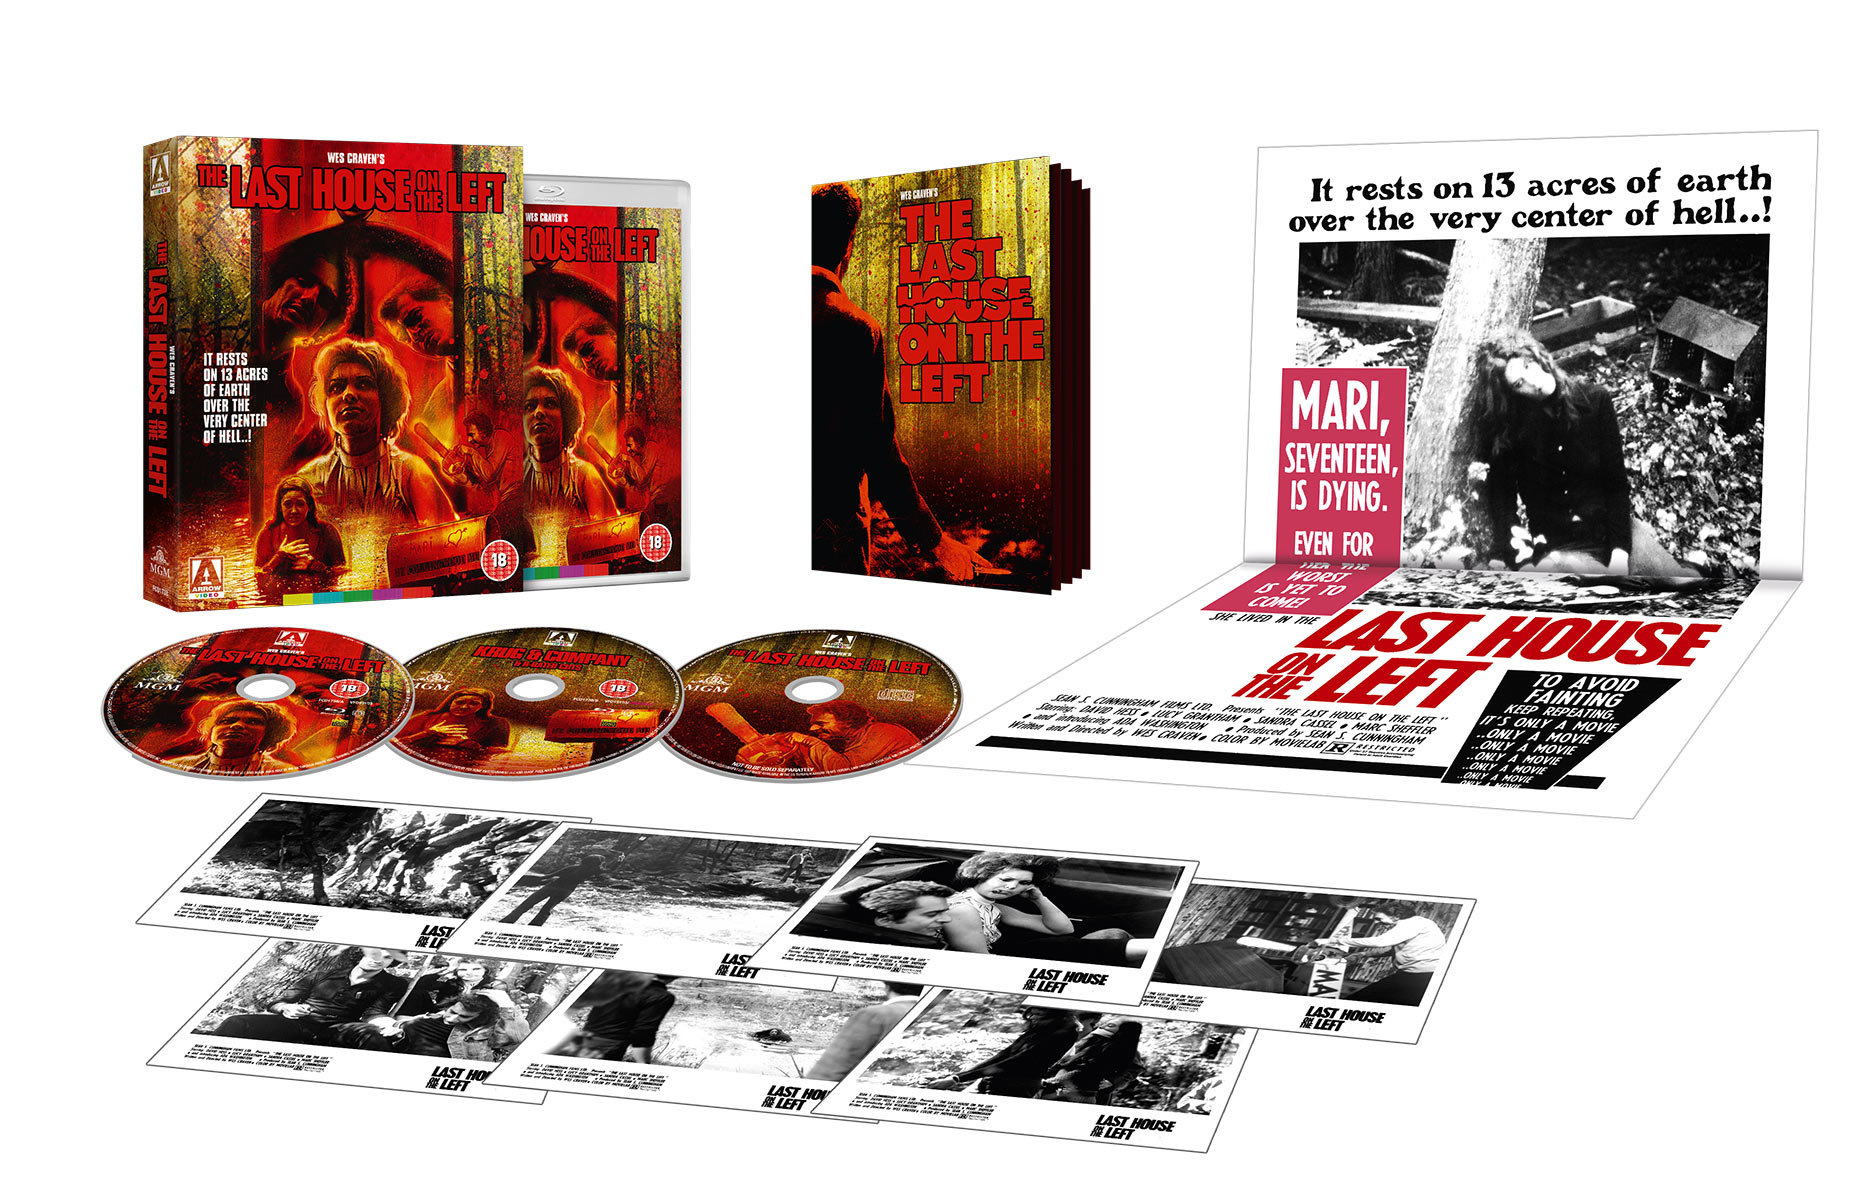 The Last House on the Left (1972) 3 Disc Limited Edition